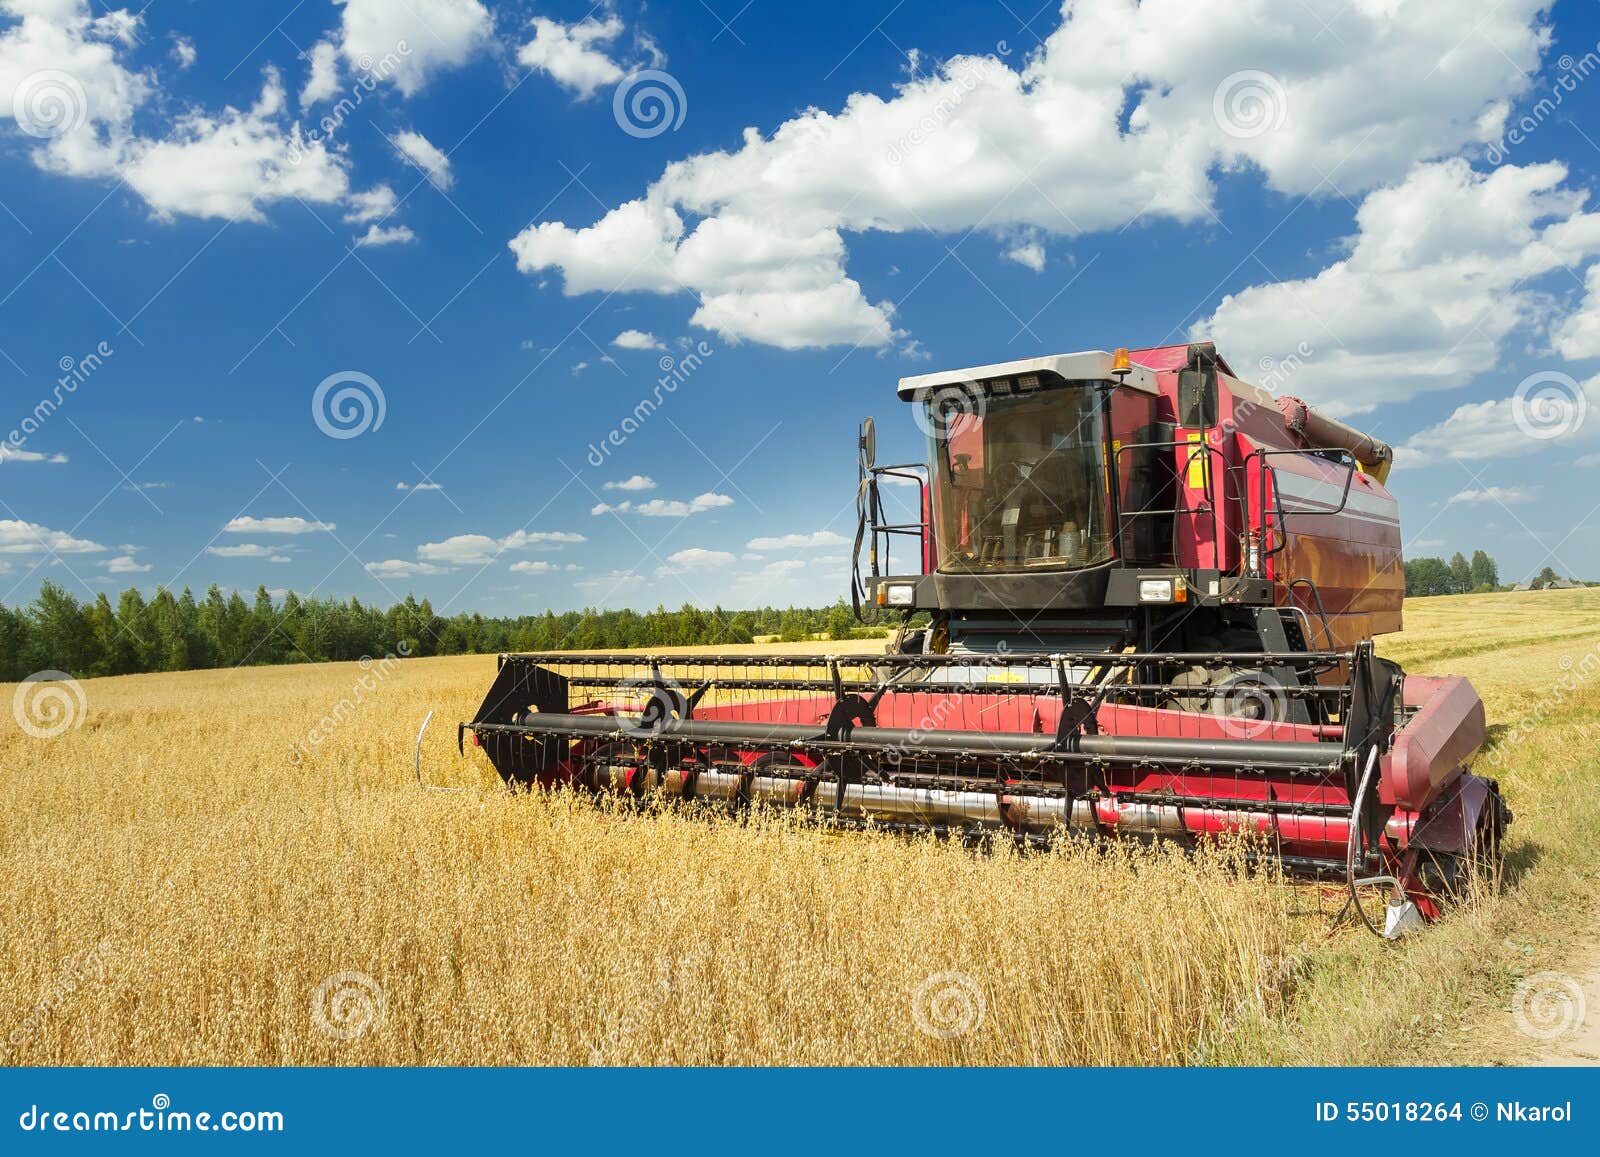 combine machine with air-conditioned cab harvesting oats on farm field